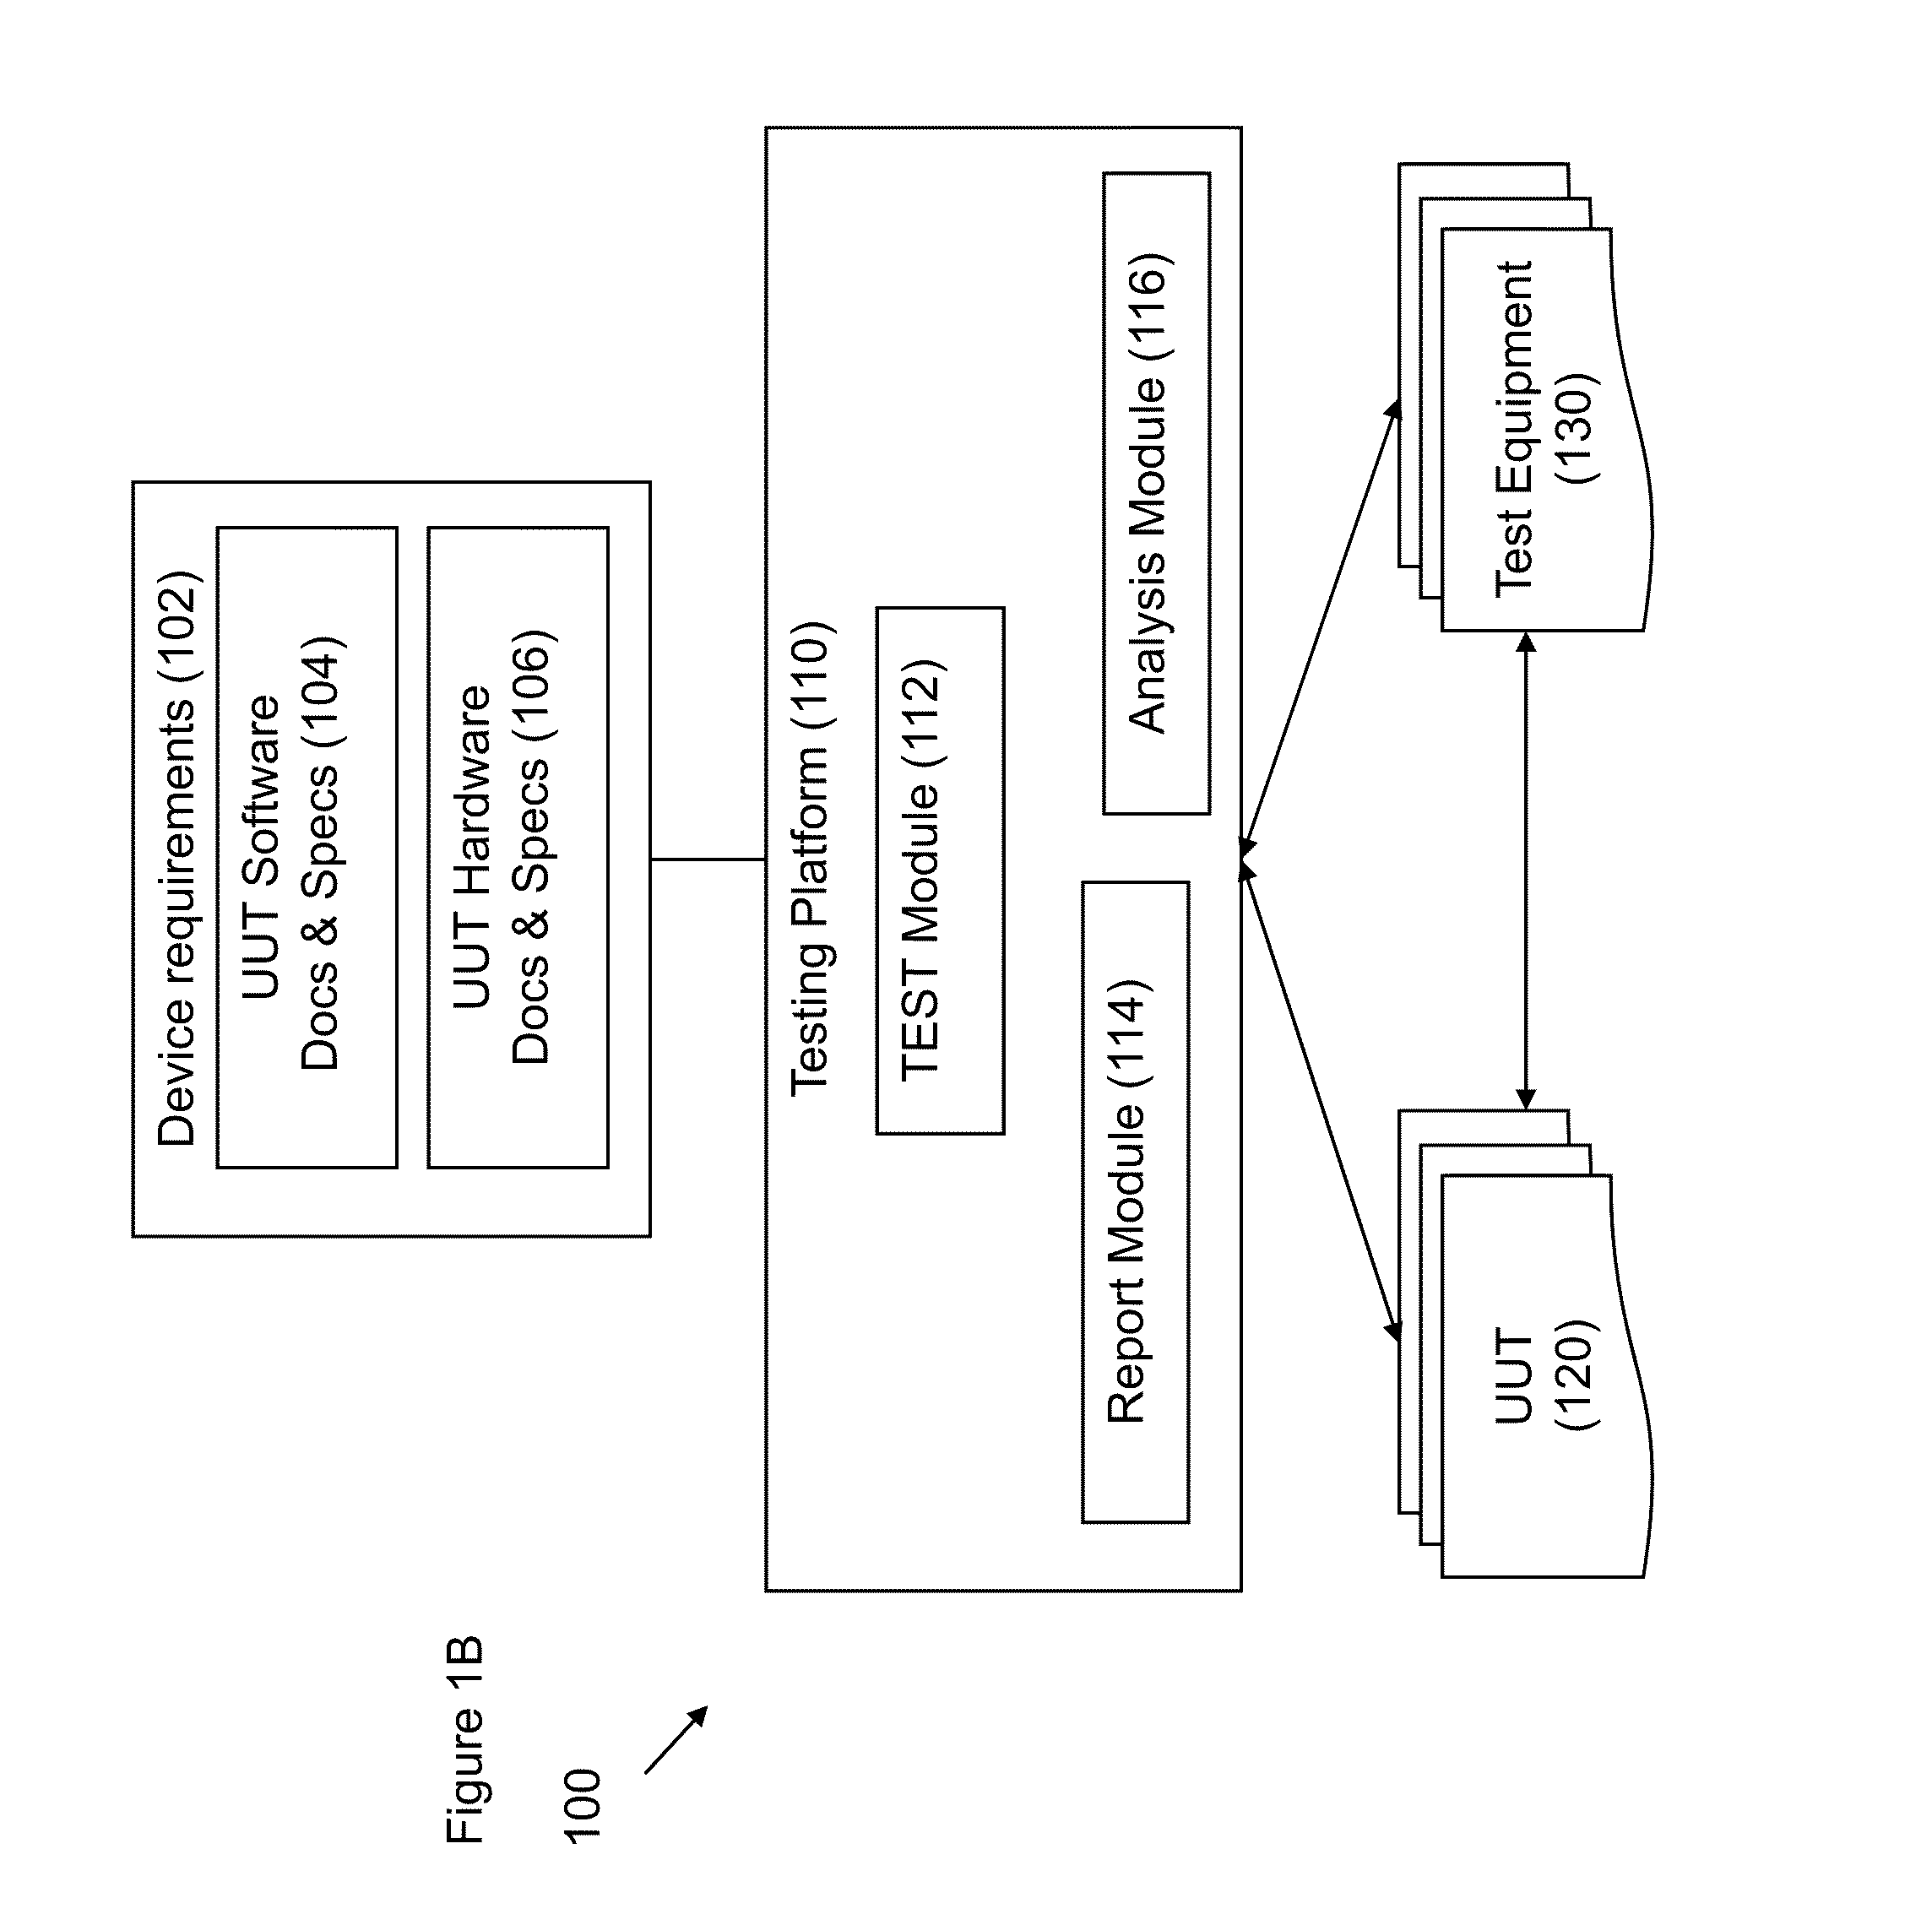 System and method for automatic hardware and software sequencing of computer-aided design (CAD) functionality testing